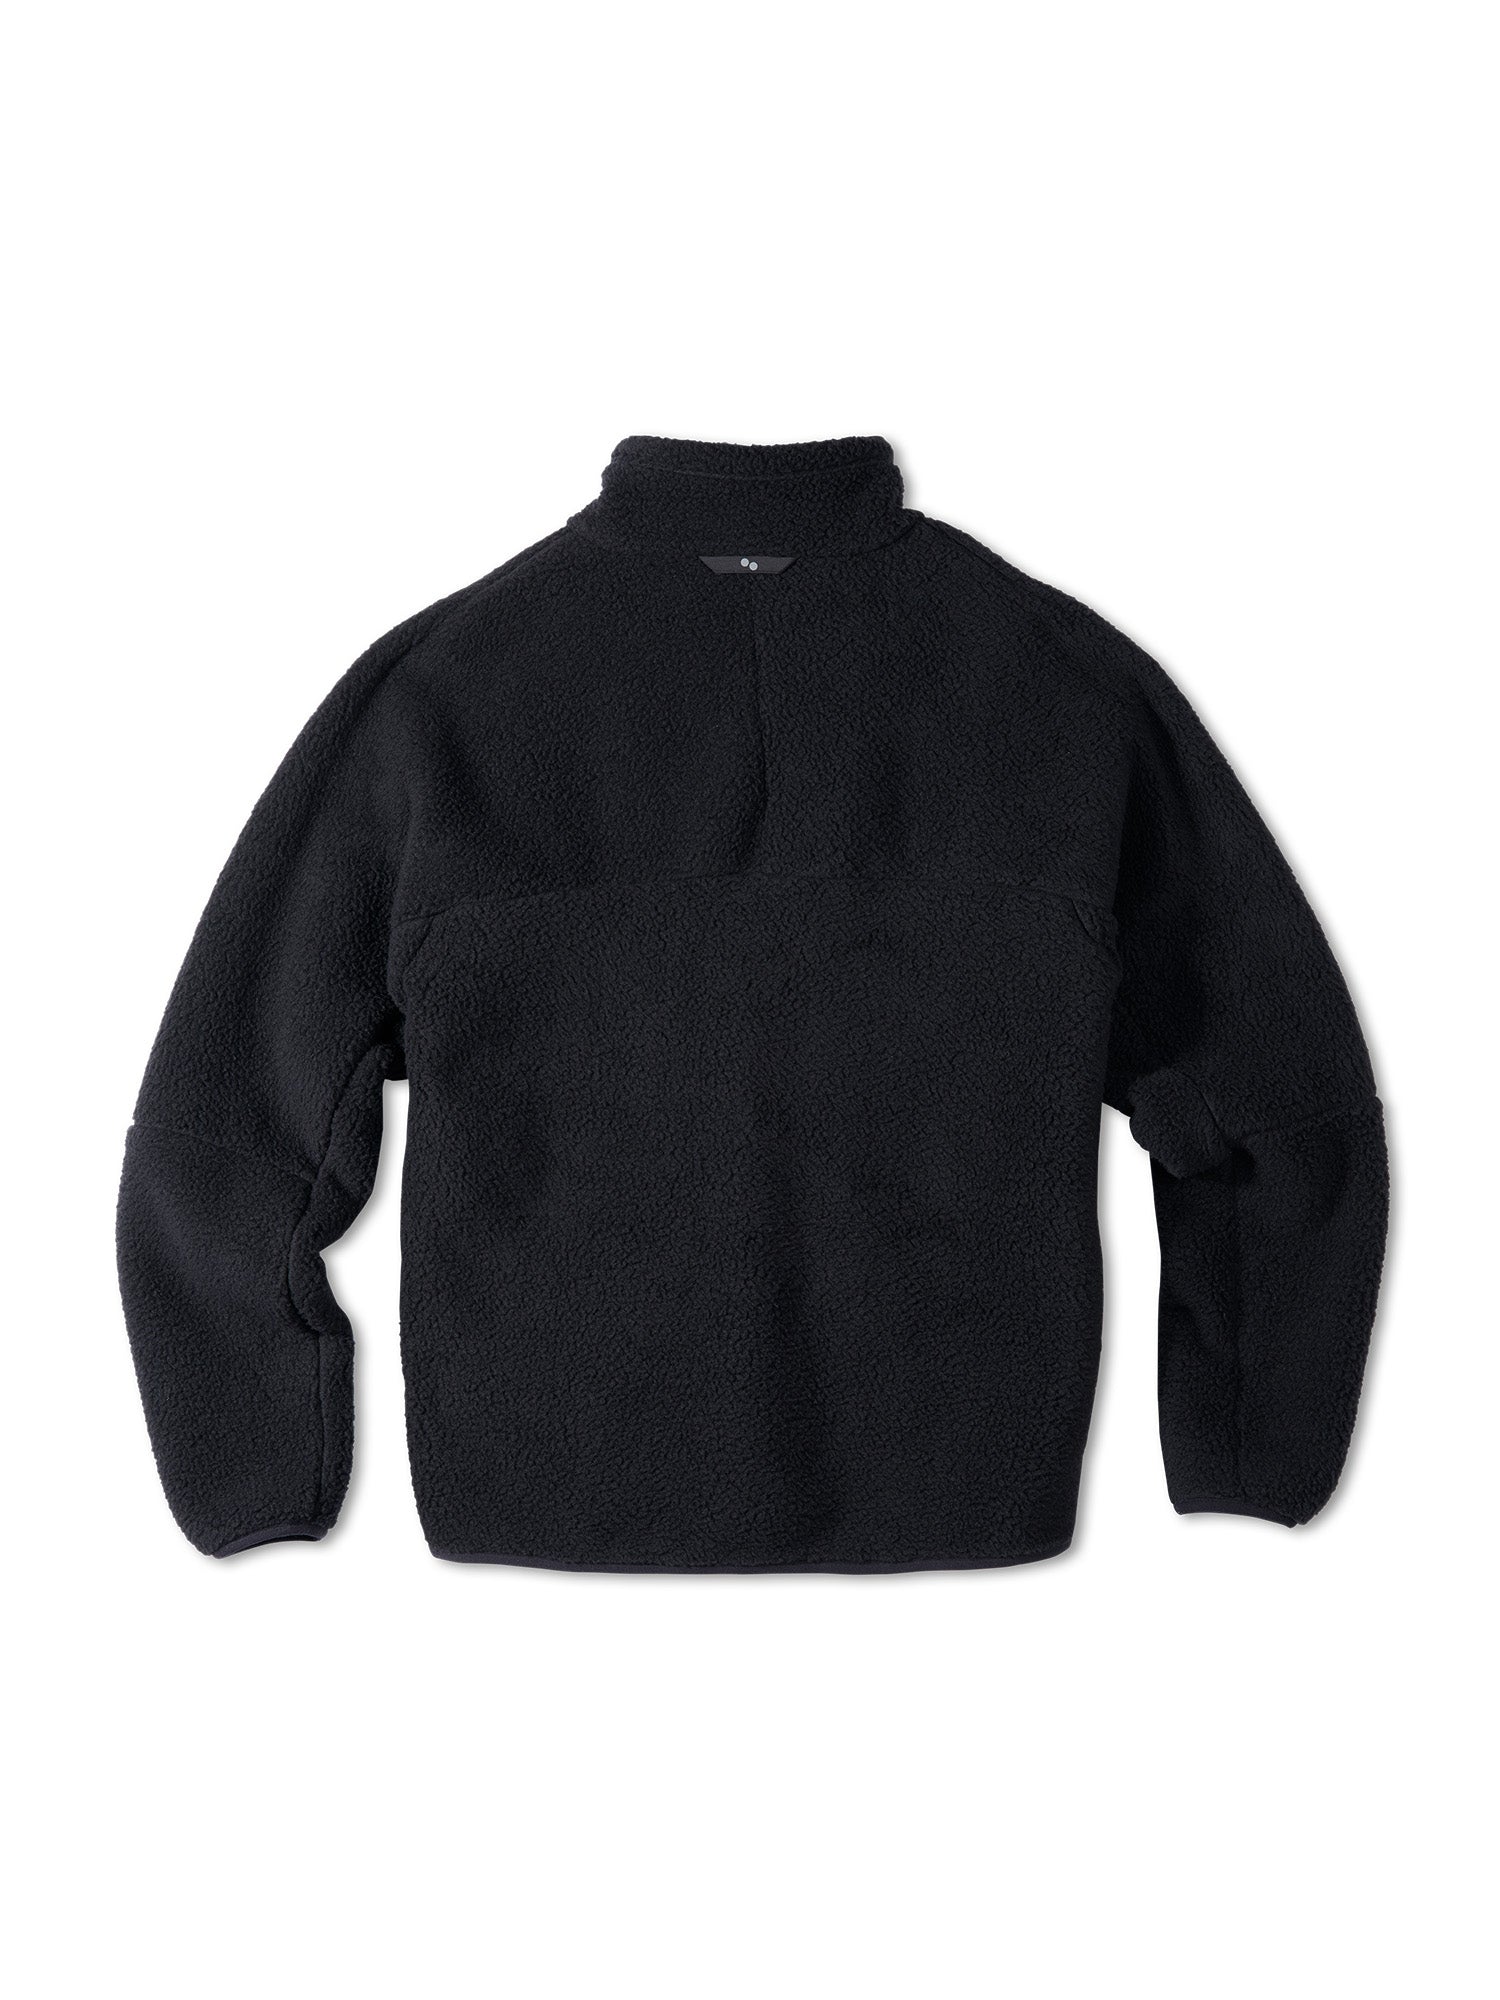 Ultra soft and warm Fleece Jacket for everyday use ✓ – pinqponq